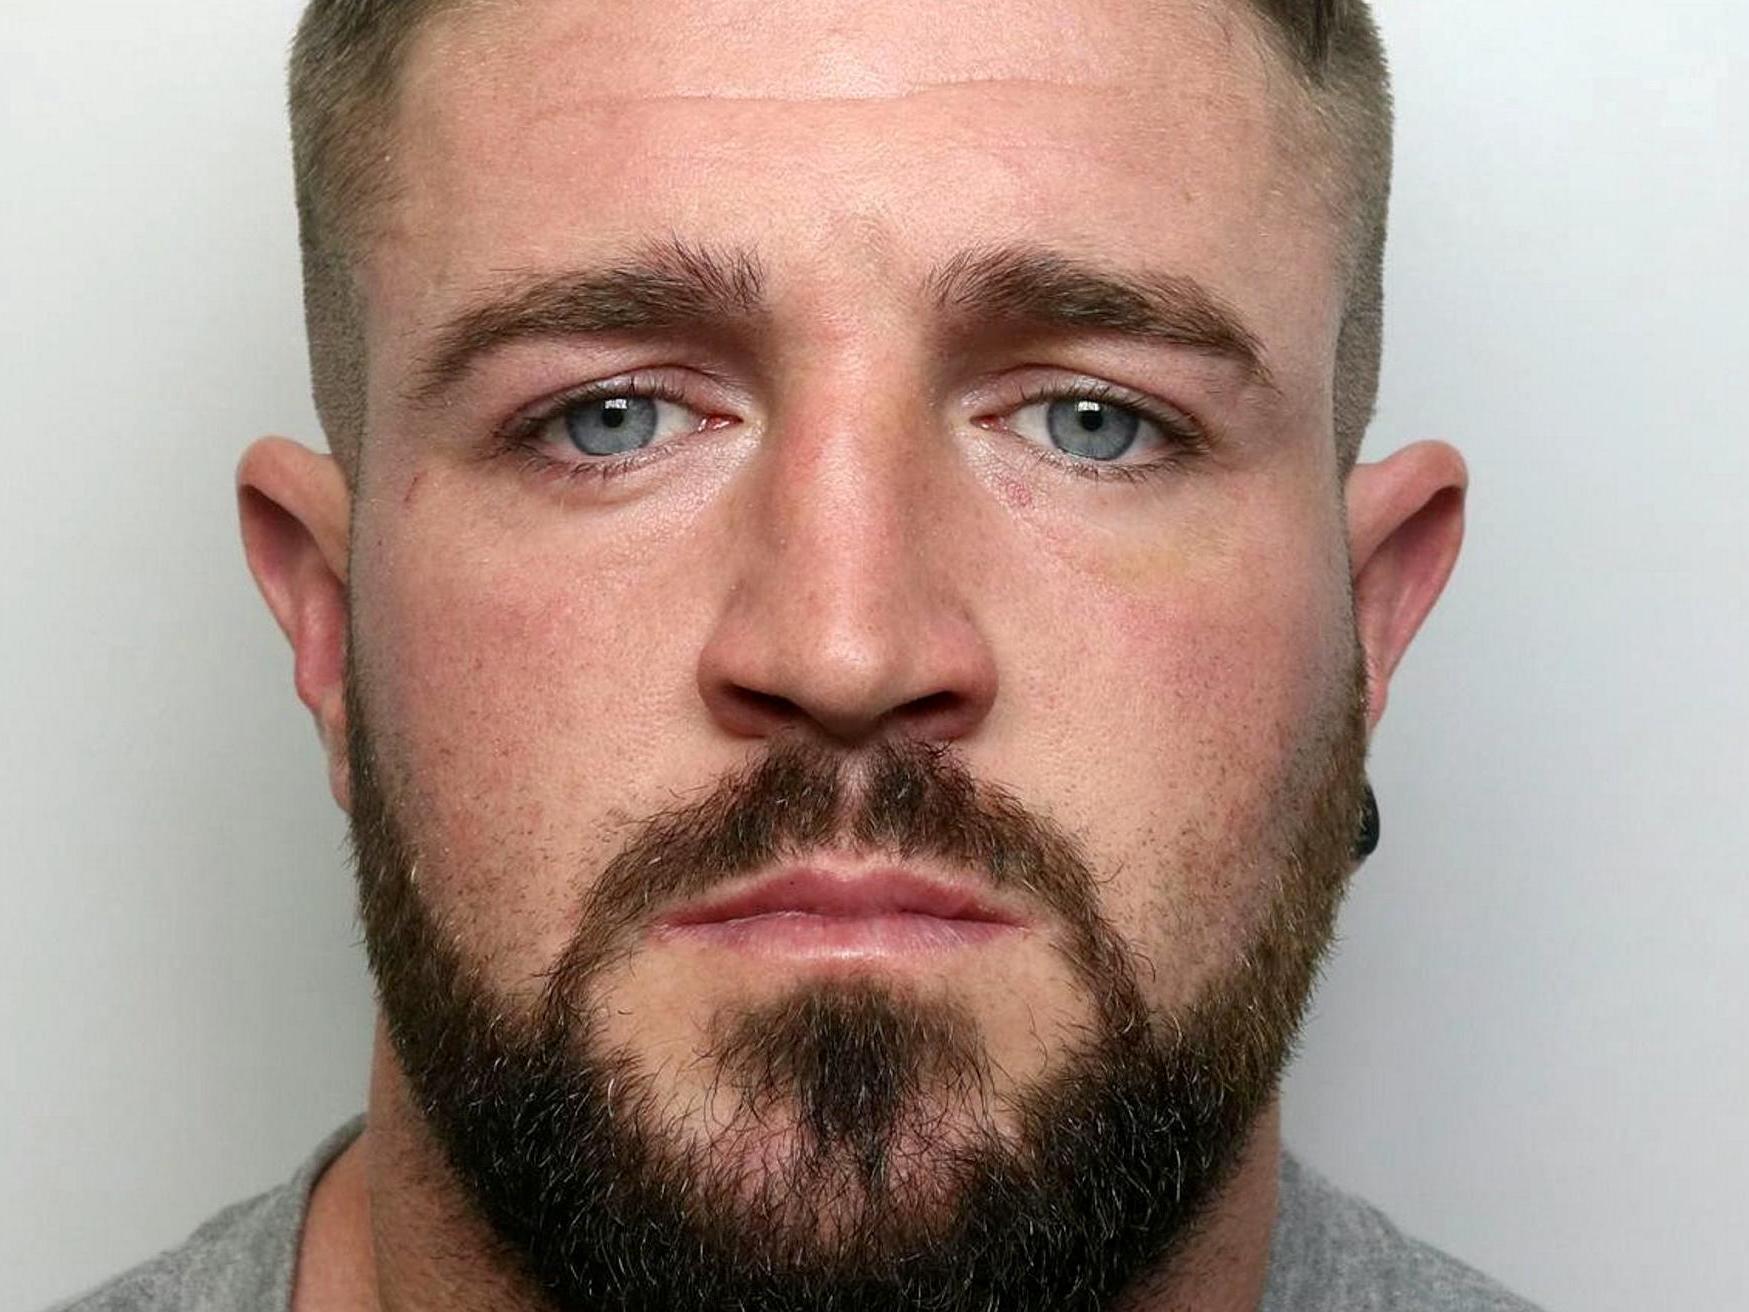 A Castleford man has been sentenced to more than 11 years after being jailed for an assault on a woman which he recorded on his own CCTV